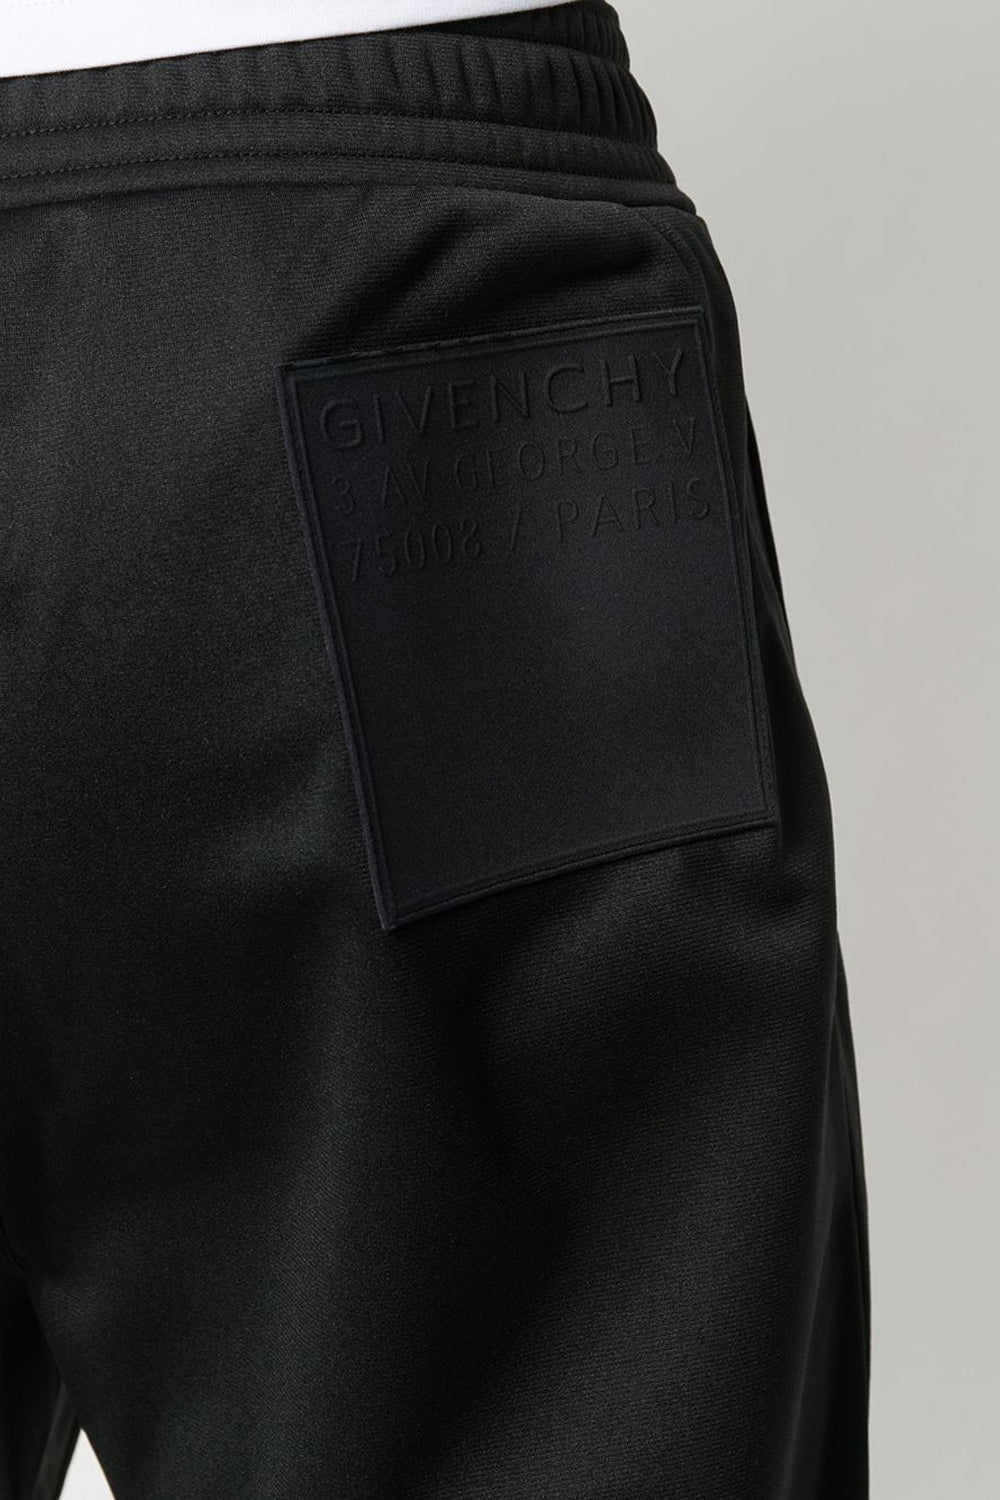 Givenchy track trousers pants